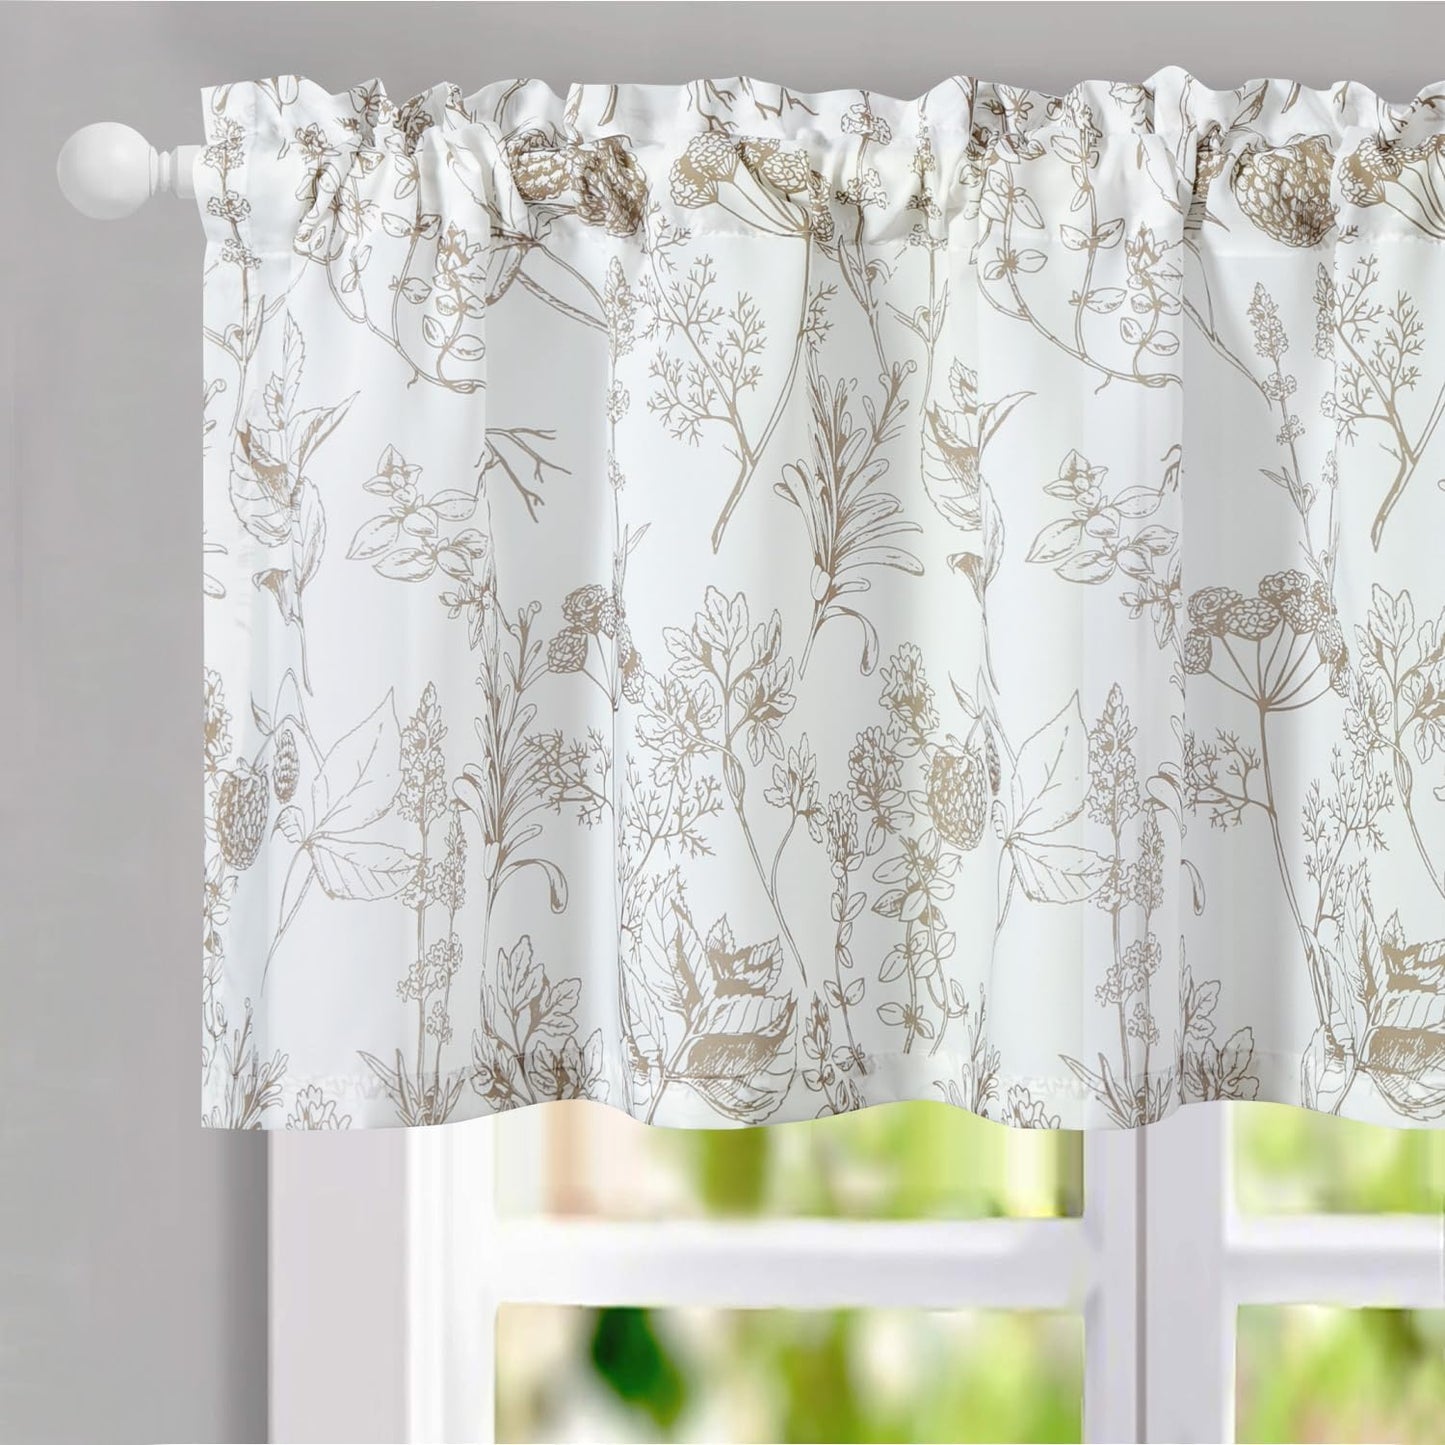 VOGOL Colorful Floral Print Tier Curtains, 2 Panels Smooth Textured Decorative Cafe Curtain, Rod Pocket Sheer Drapery for Farmhouse, W 30 X L 24  VOGOL Mn011 W52 X L18 